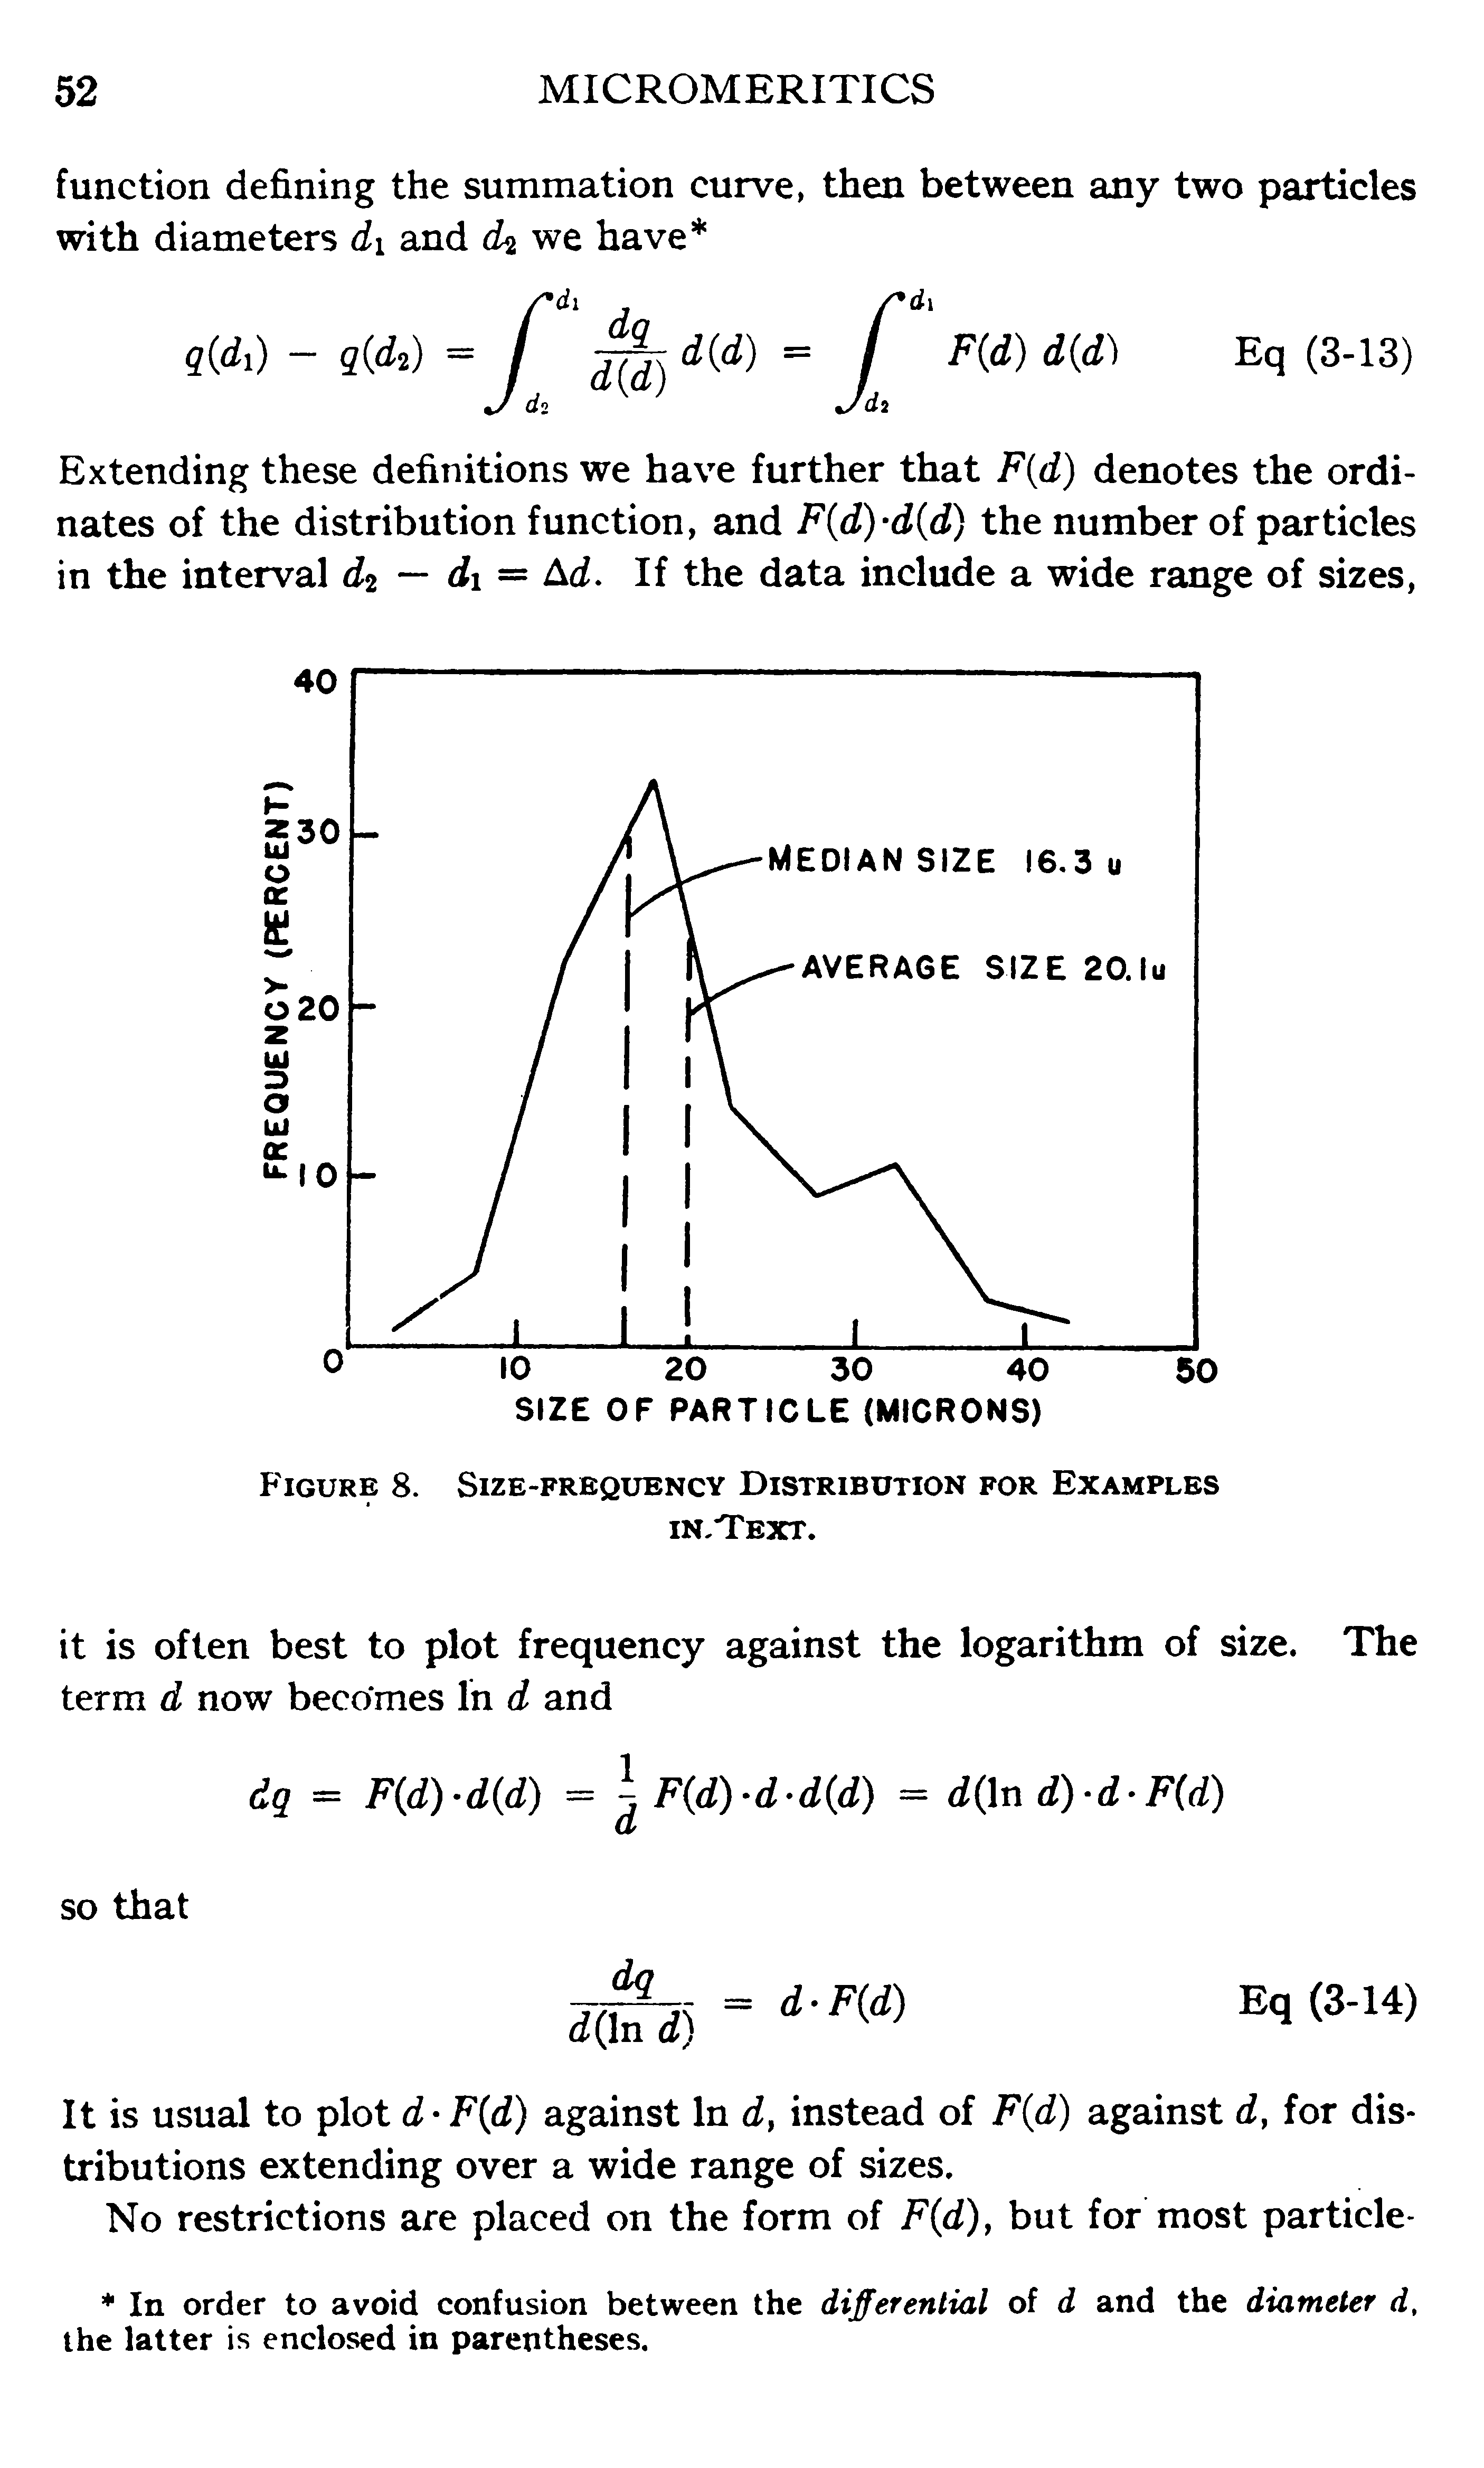 Figure 8. Size-frequency Distribution for Examples in, Text.